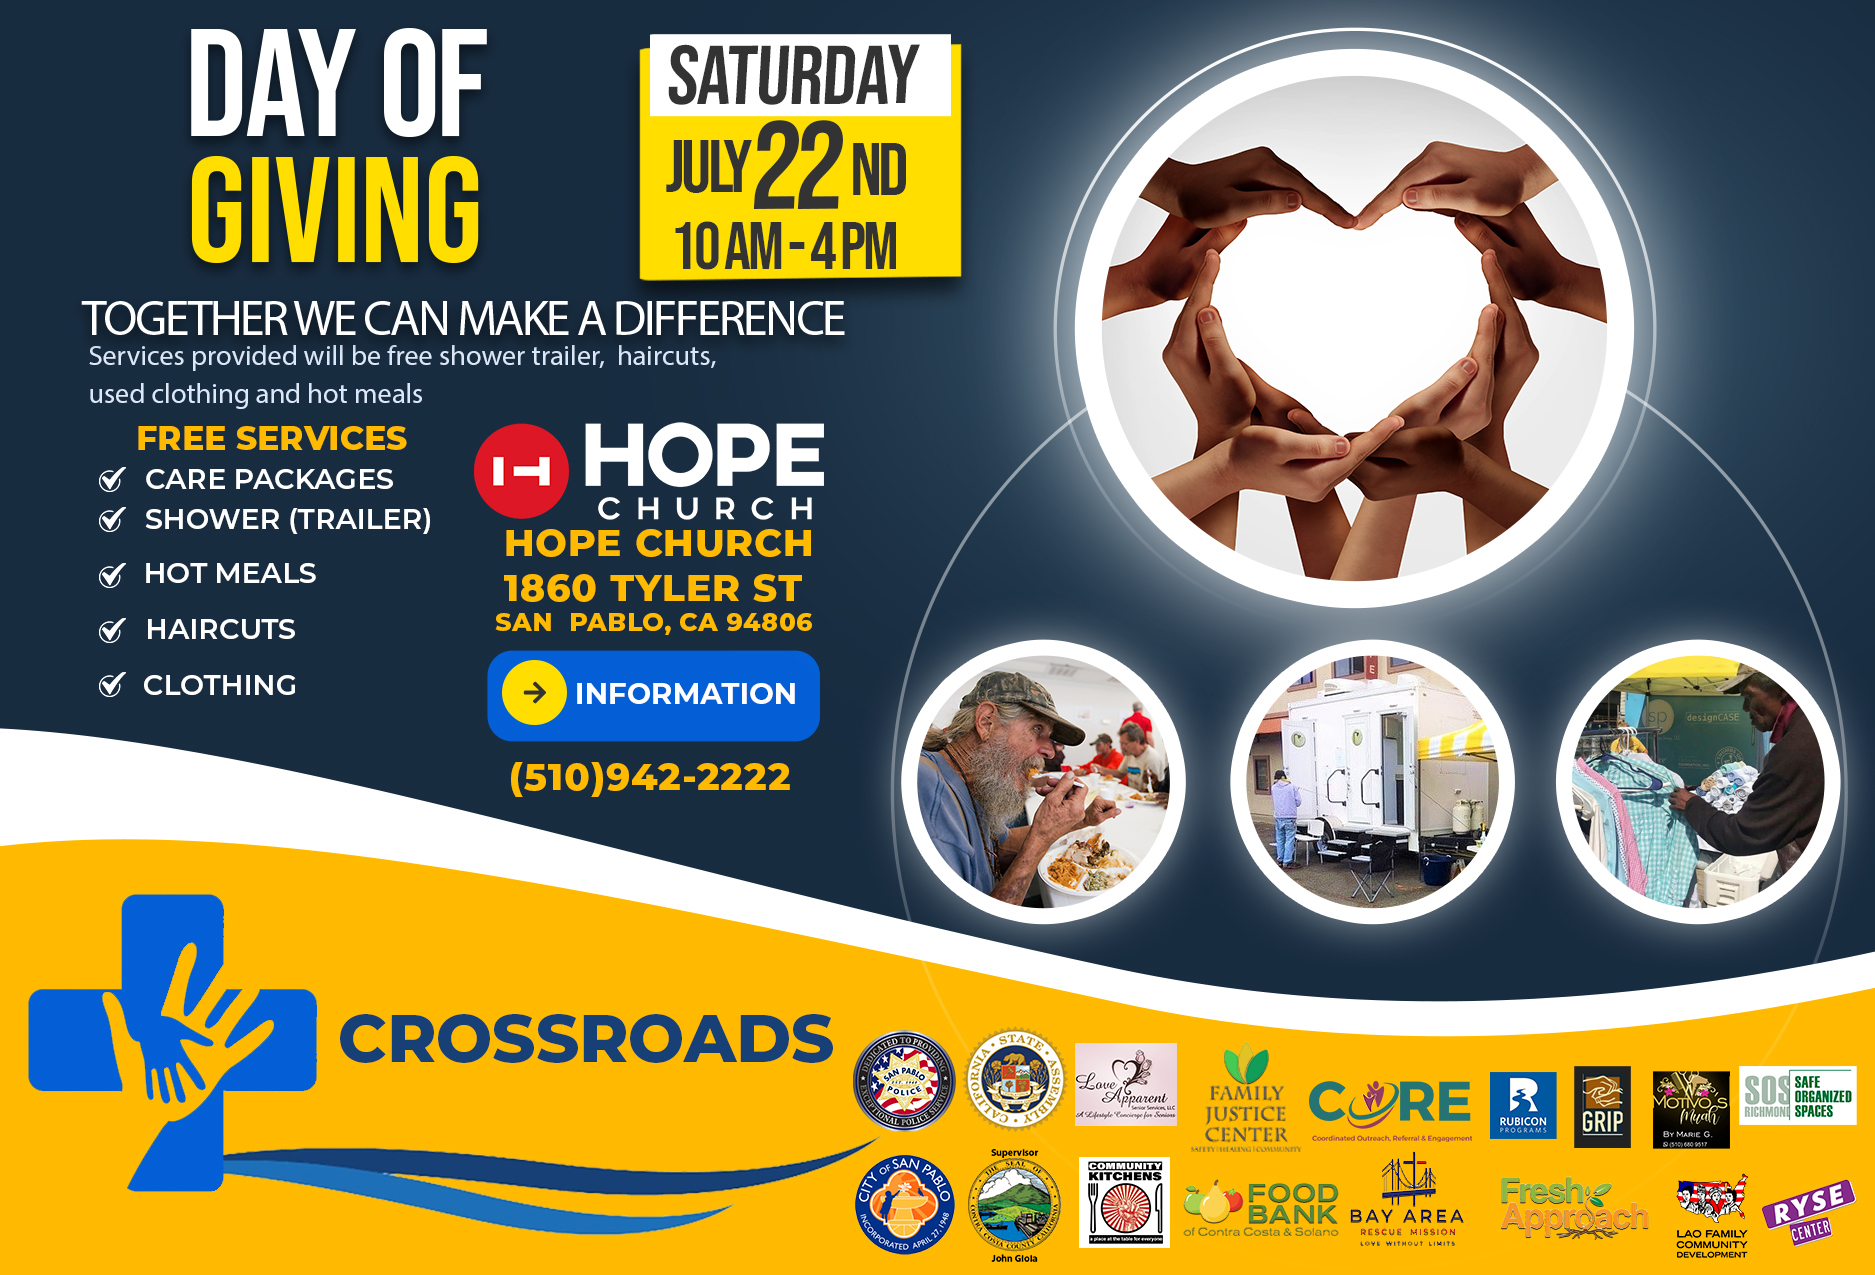 Event graphic highlighting that the event is taking place on Saturday, July 22 from 10am-4pm, and will provide services including food, showers, haircuts, clothing, and more. 